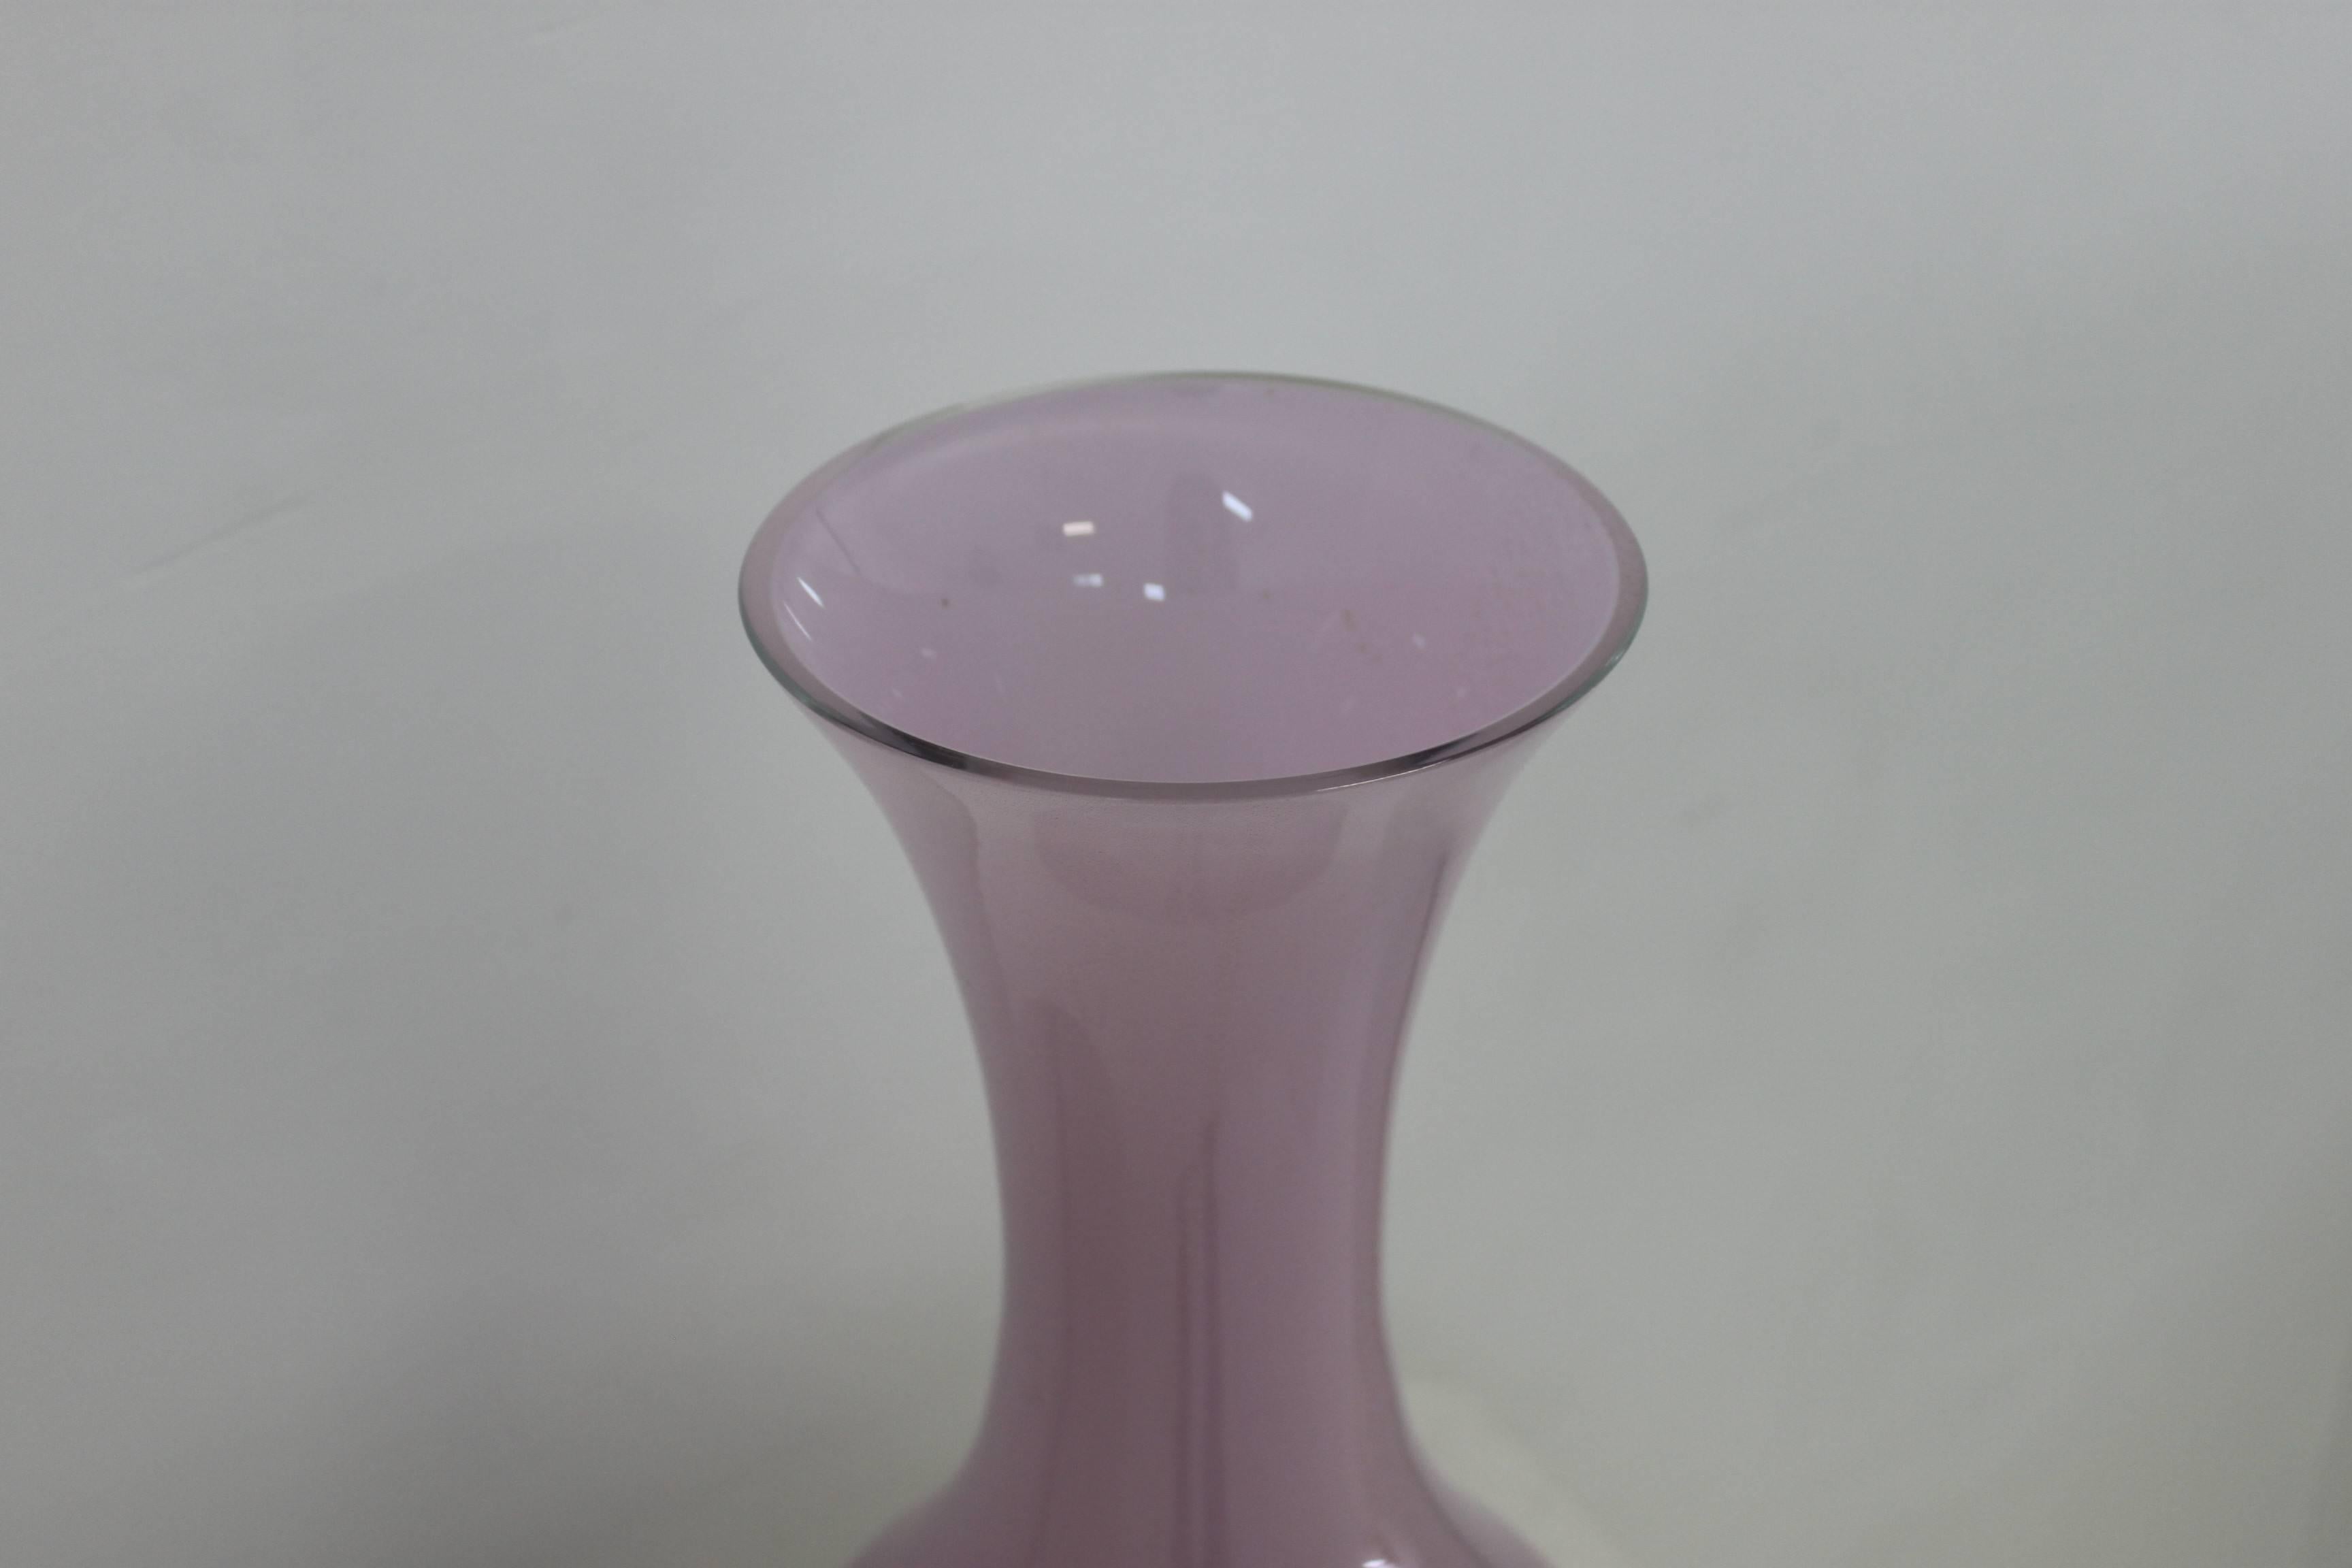 Amazing vase designed by Salviati for Venini. 
Pink vase with golden iridescence.
Glass only.
Signed below.